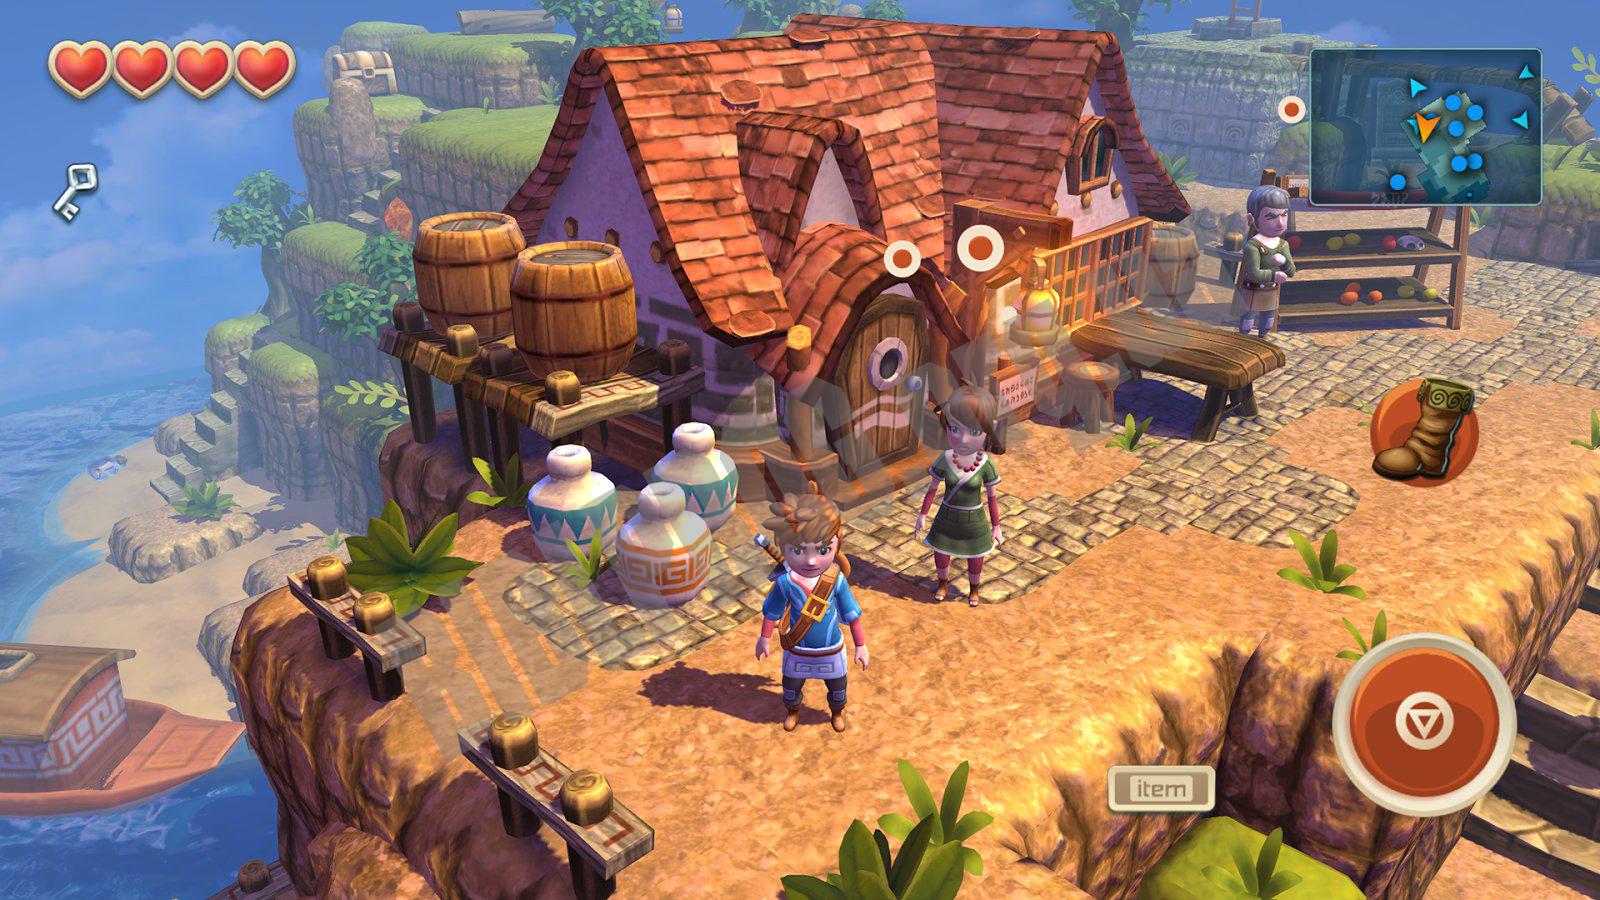 oceanhorn 2 free download android